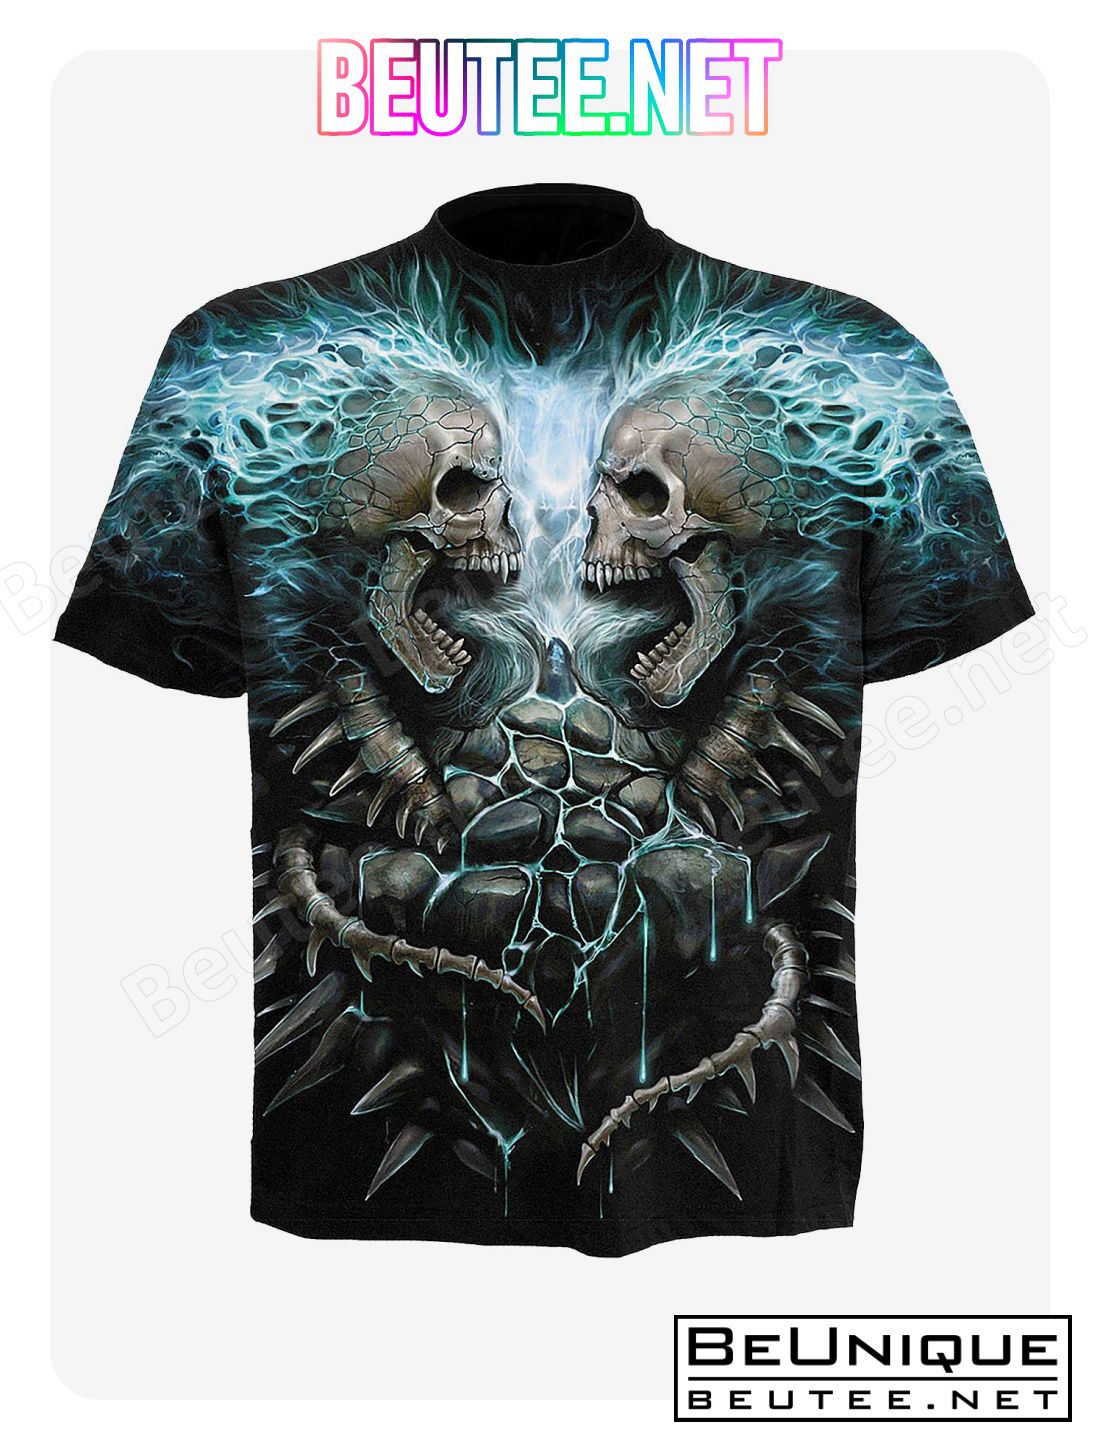 Flaming Spine T-Shirt